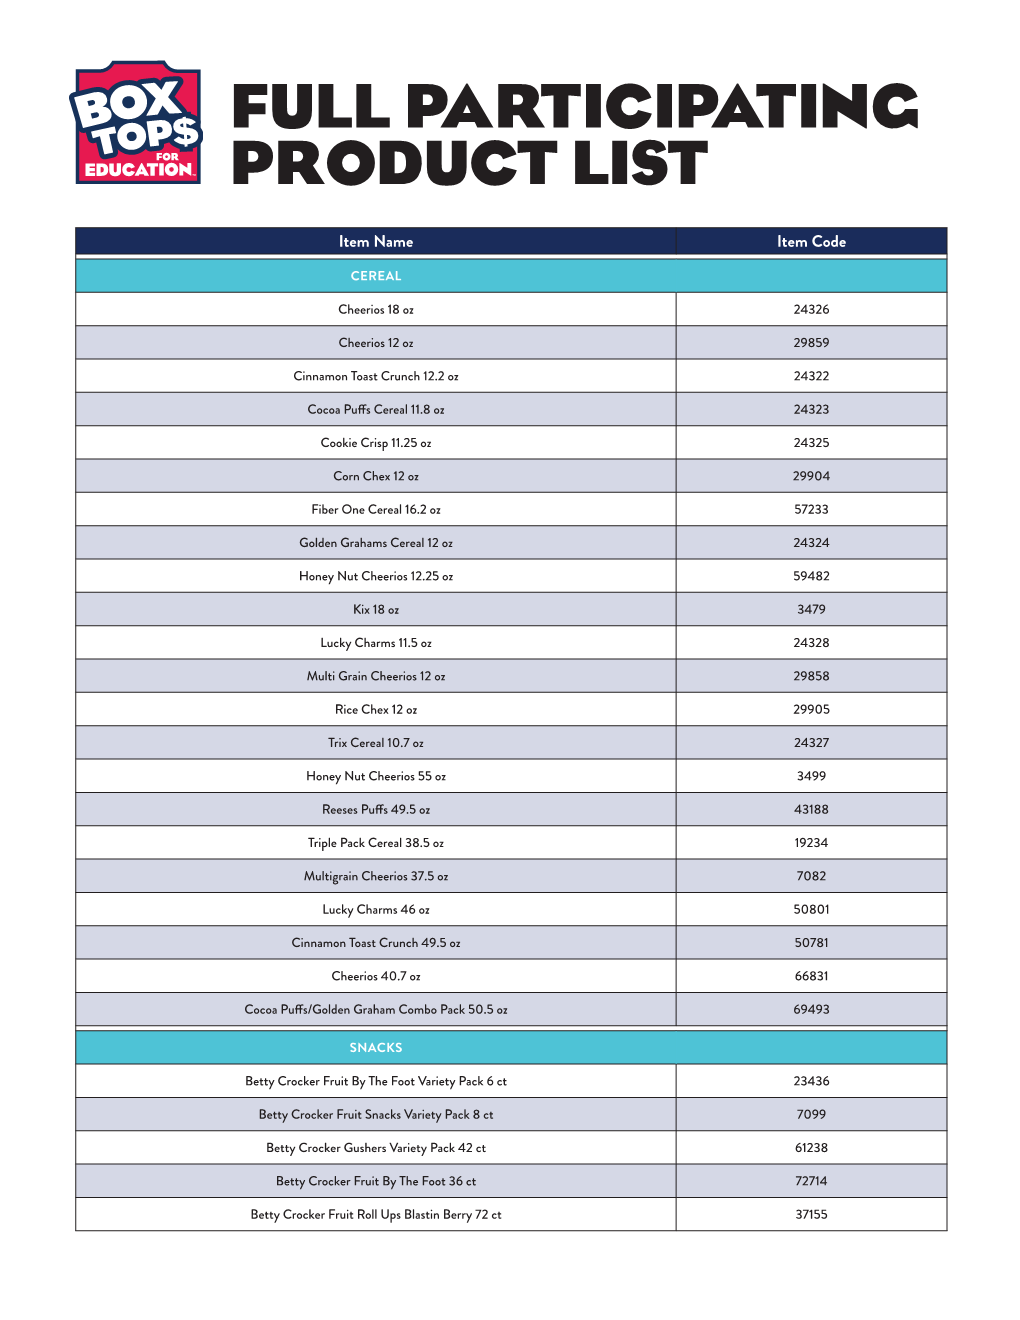 Full Participating Product List